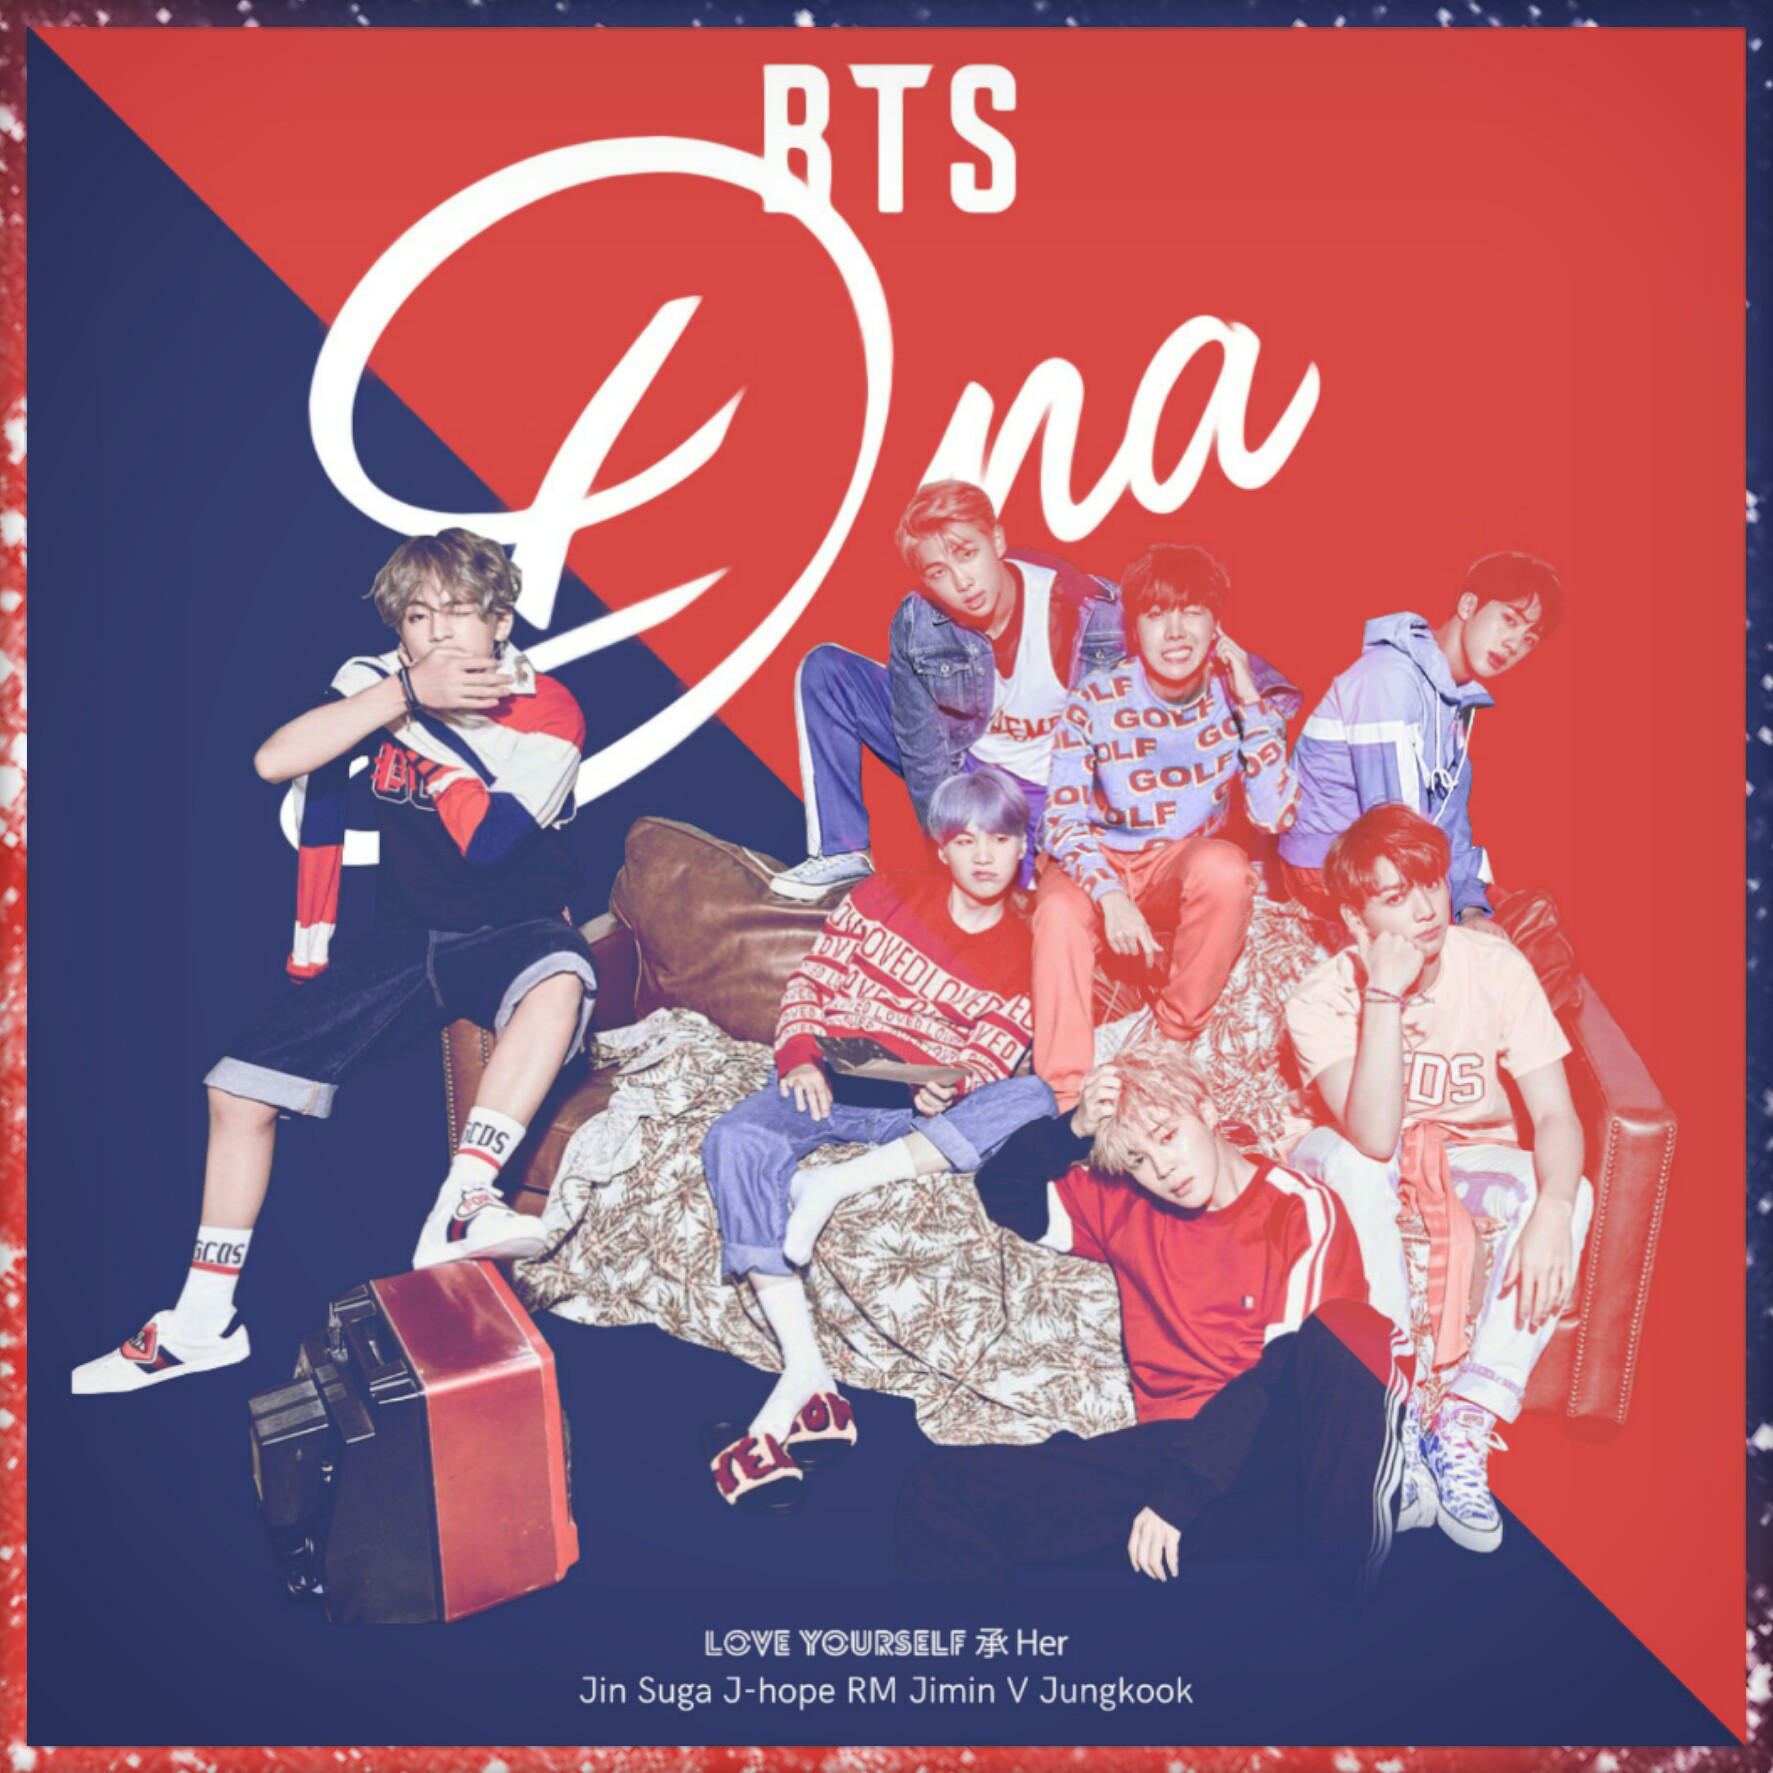 BTS DNA (LOVE YOURSELF : HER) album cover by LEAlbum on ...